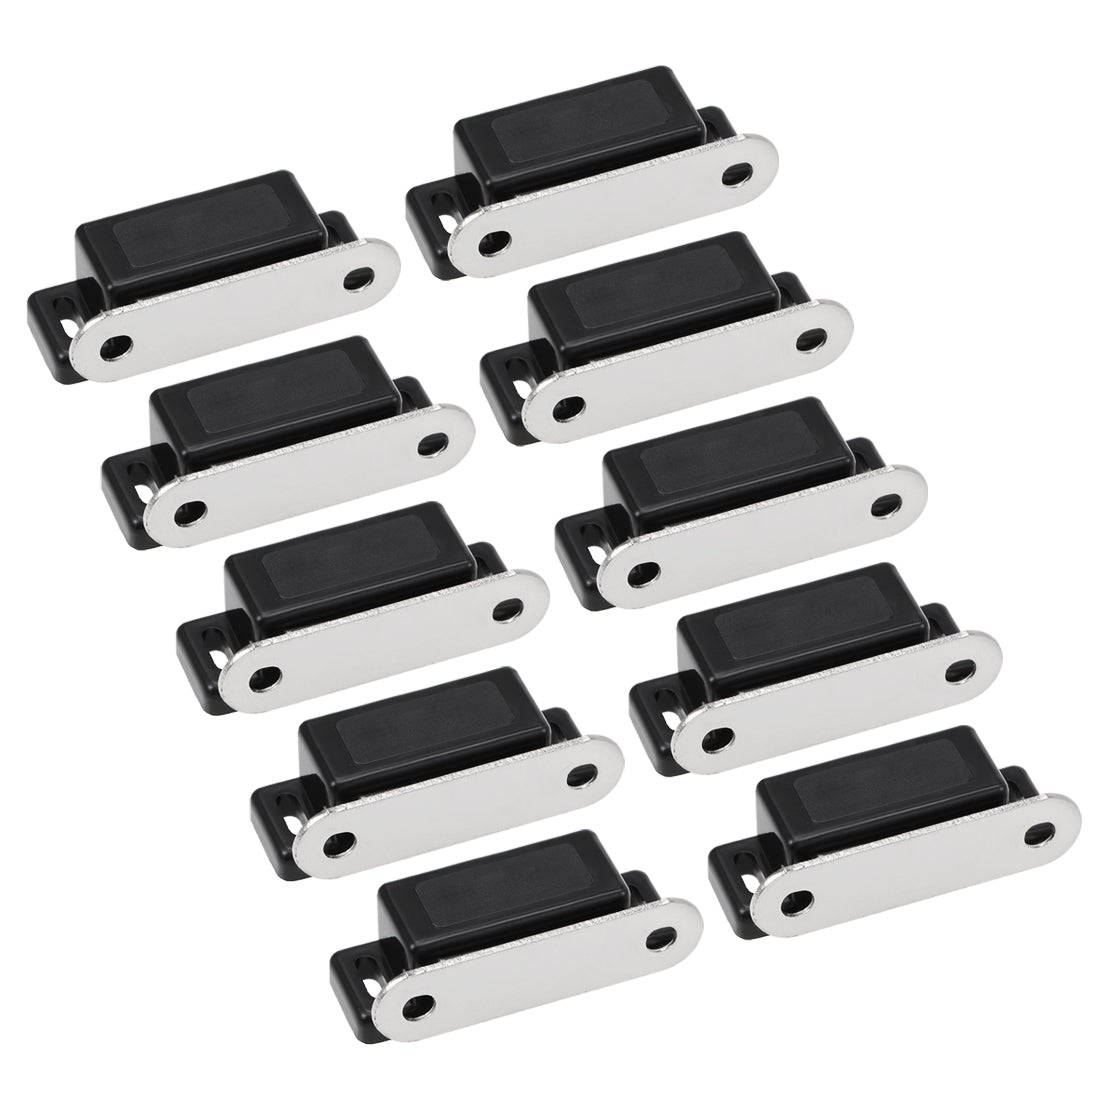 uxcell Uxcell Magnetic Cabinet Door Latches Catch for Kitchen Closet Wardrobe Black 10pcs